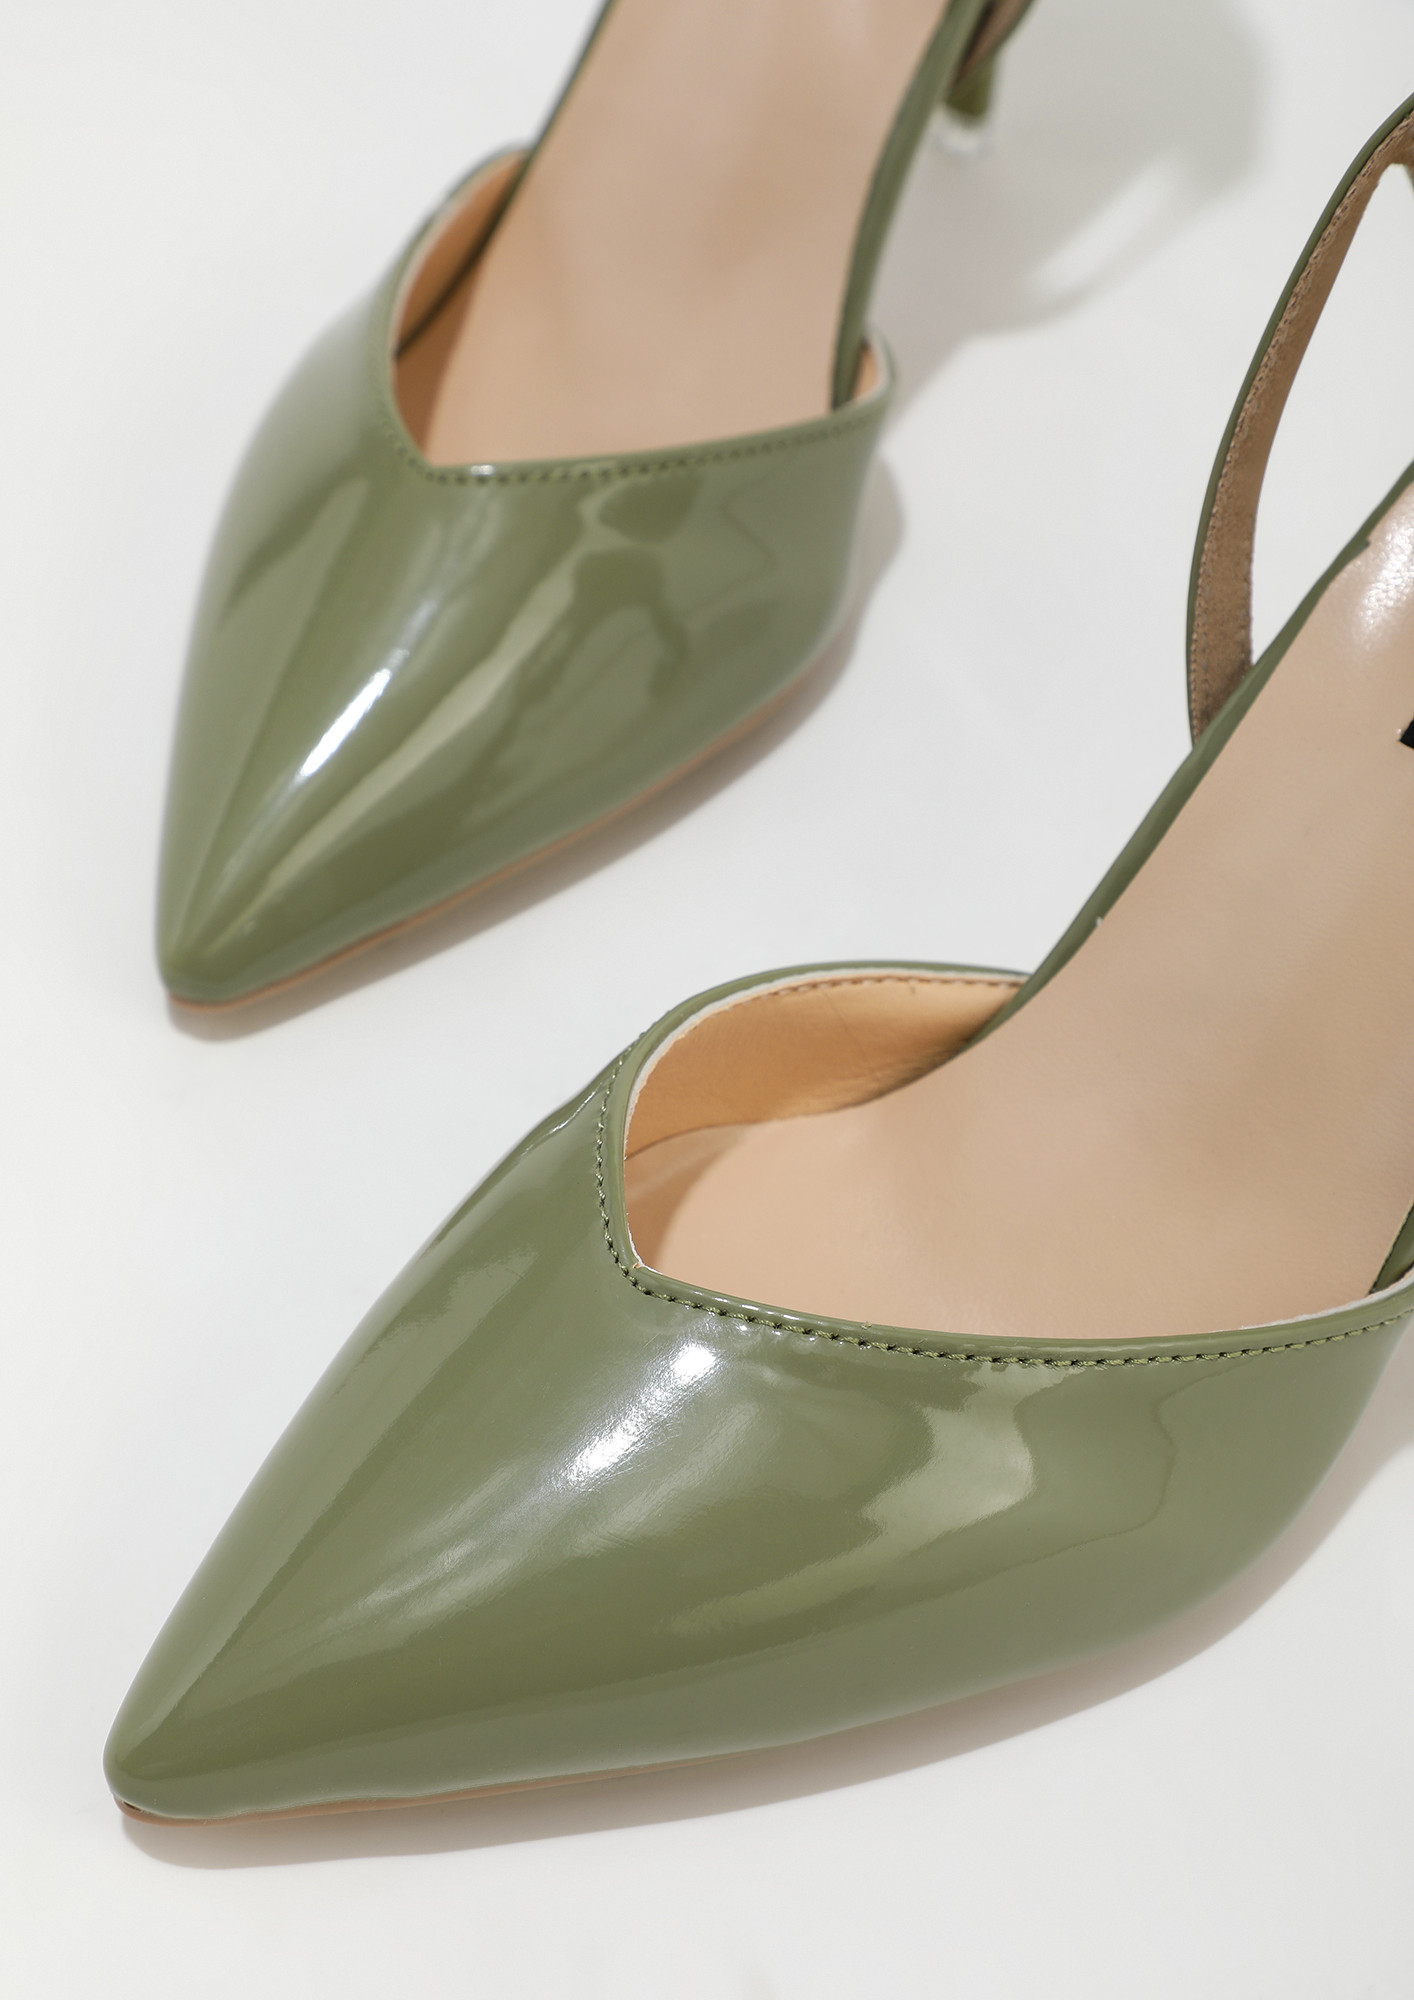 oLiVe GReeN CROC EUC sz 8 LEATHER Pointy Toe Stiletto Heels PUMPS CARRIE  GuESS | eBay